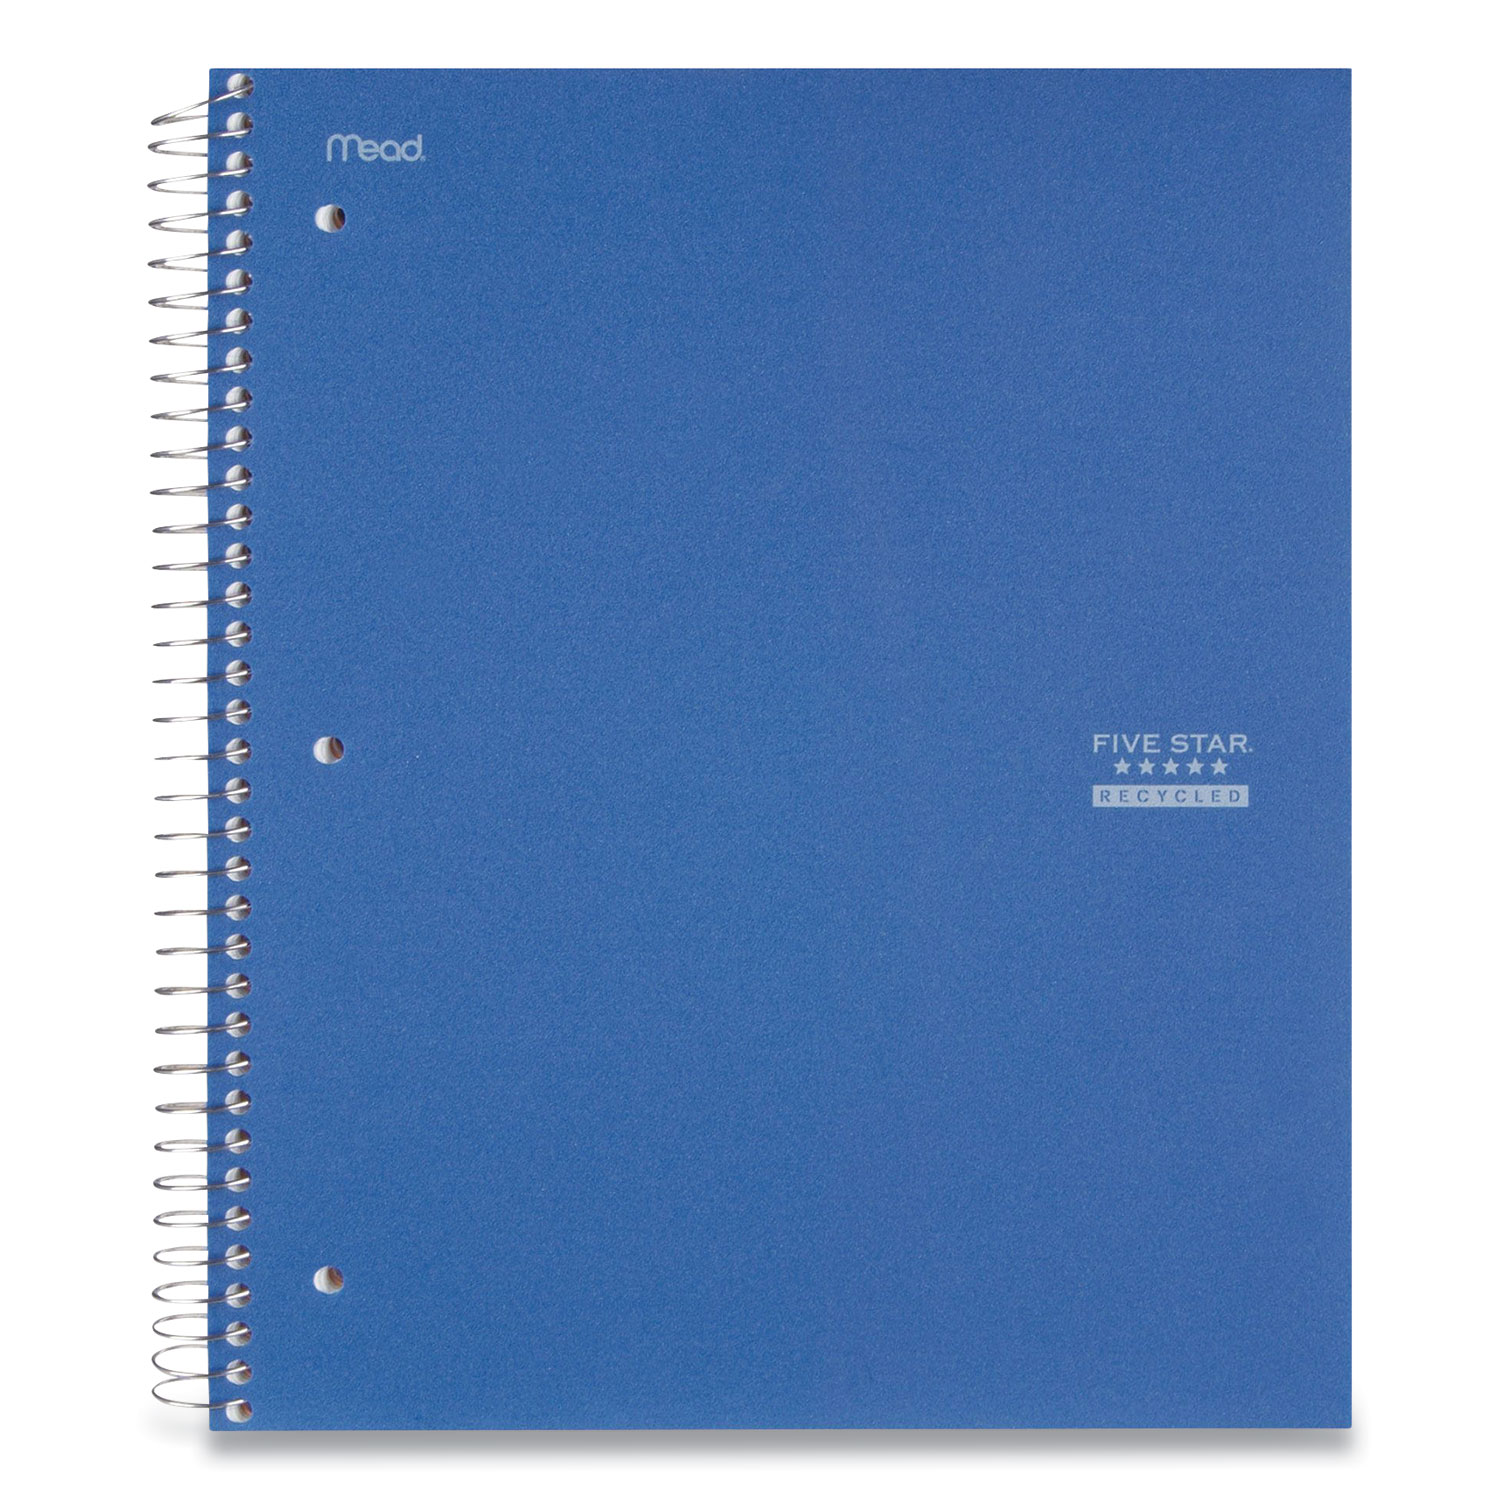  Five Star 06148 Recycled Wirebound Notebook, Medium/College Rule, Assorted Colors, 11 x 8.5, 100 Sheets (ACC503123) 